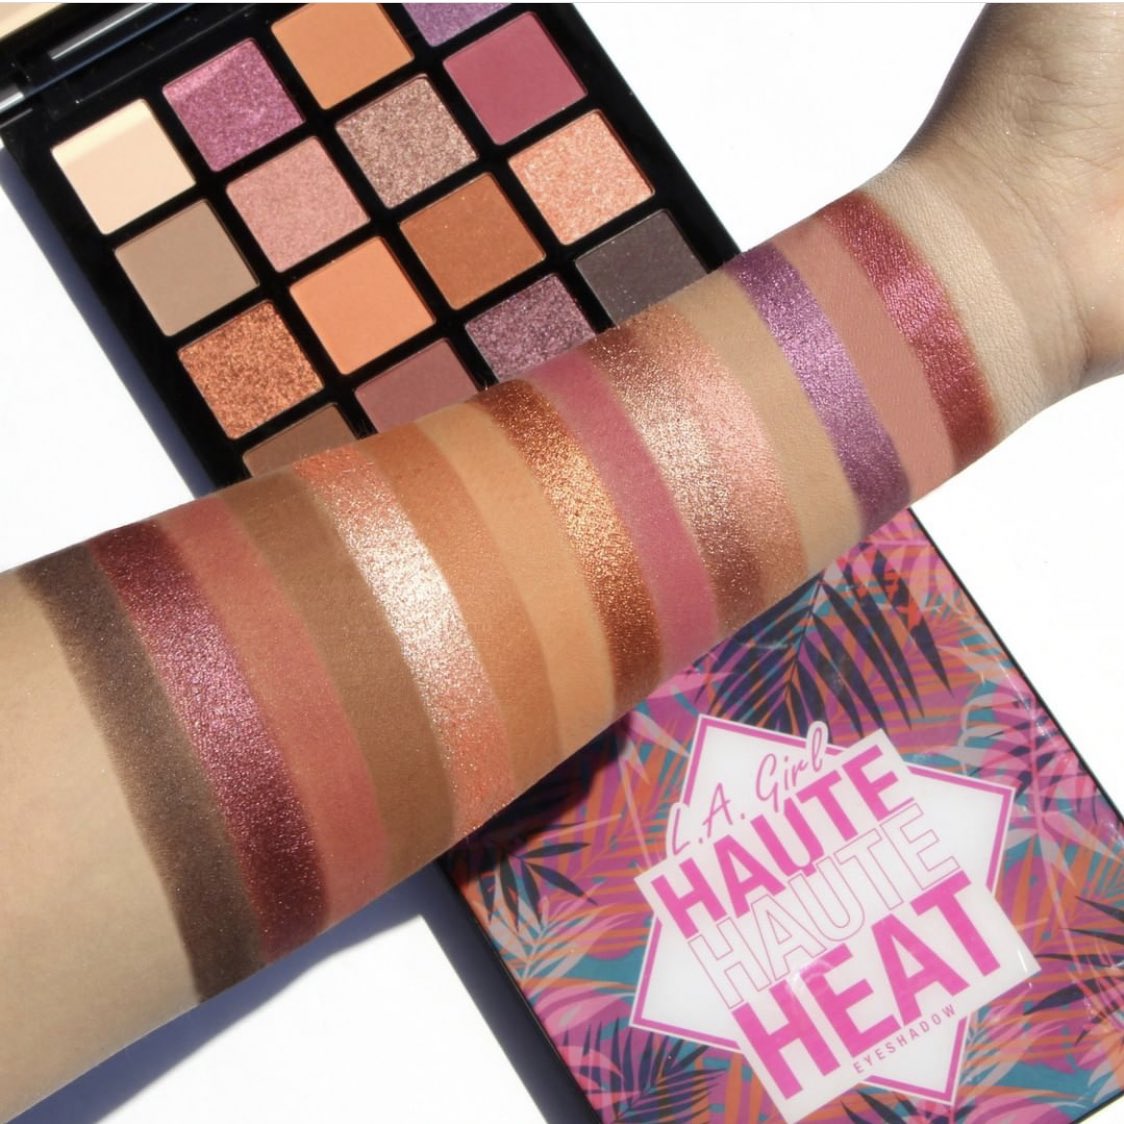 I’m back!These  @lagirlusa haute heat palettes are STUNNING. And even better they’re only $18.Have you EVER seen pigment like this available in the drugstore because I’m floored